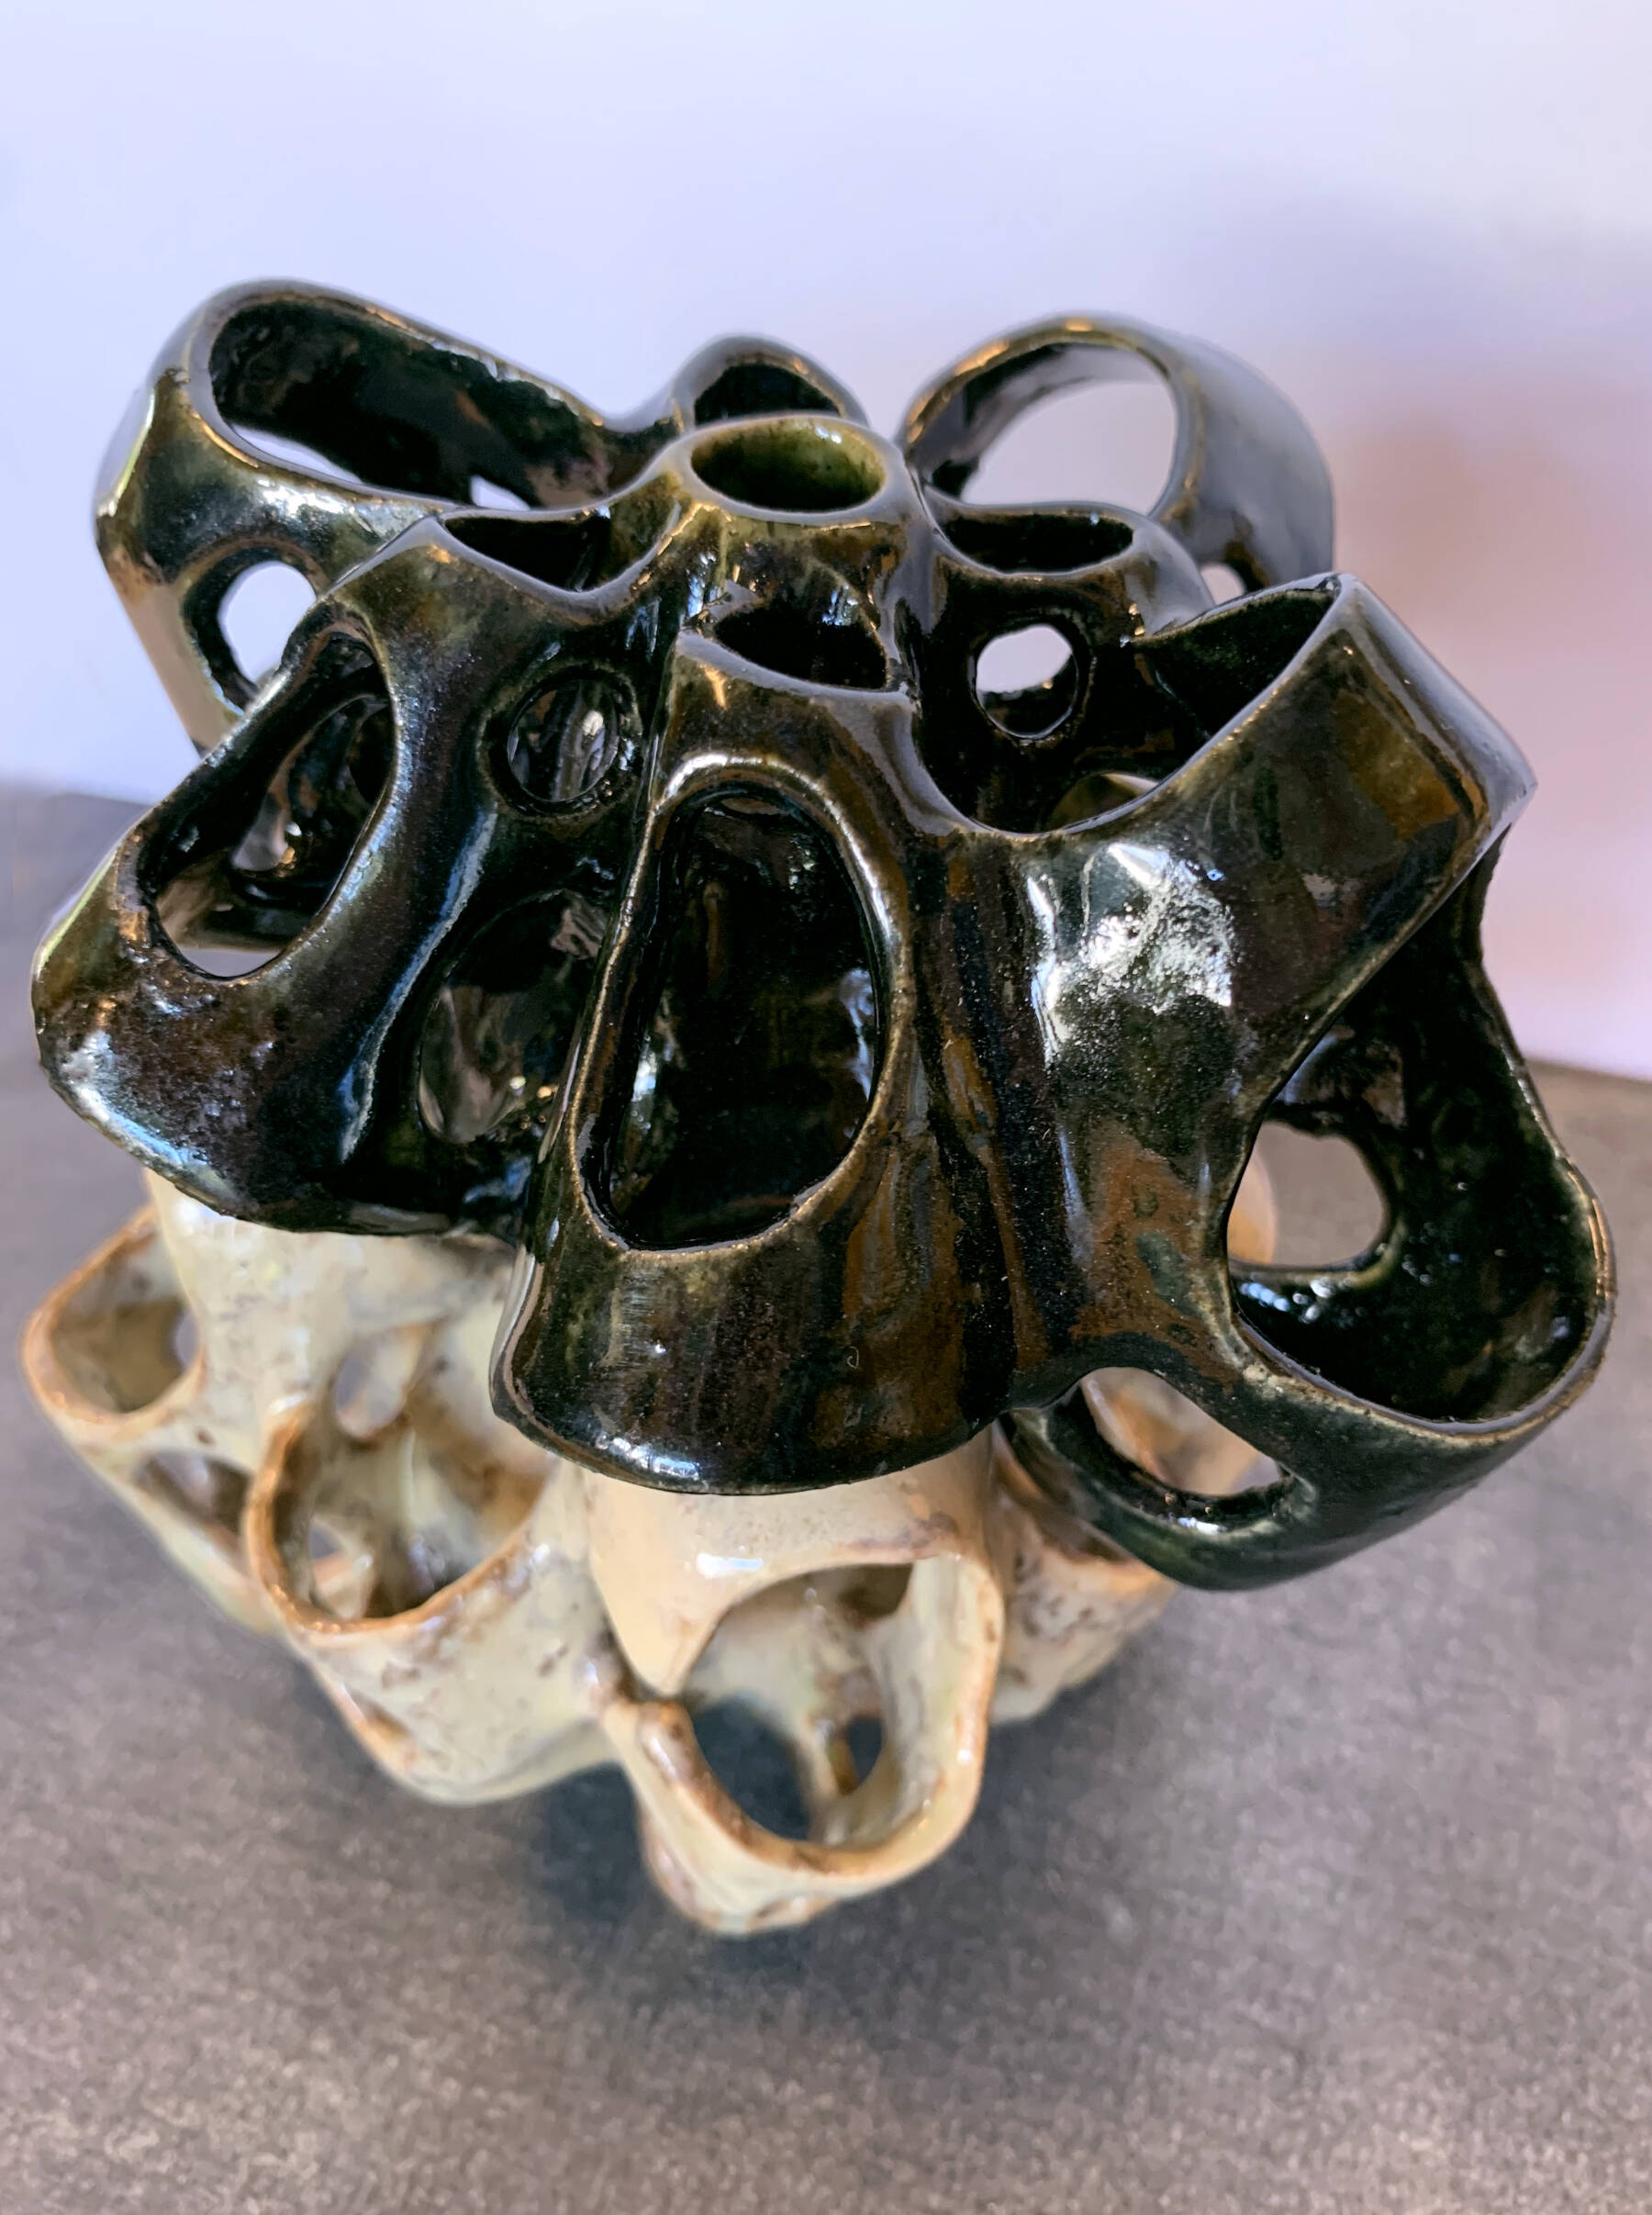 “Stacked,” a ceramic sculpture by Sarah Julig is on display at Homer Council on the Arts during their September ceramics student showcase. Photo provided by Homer Council on the Arts